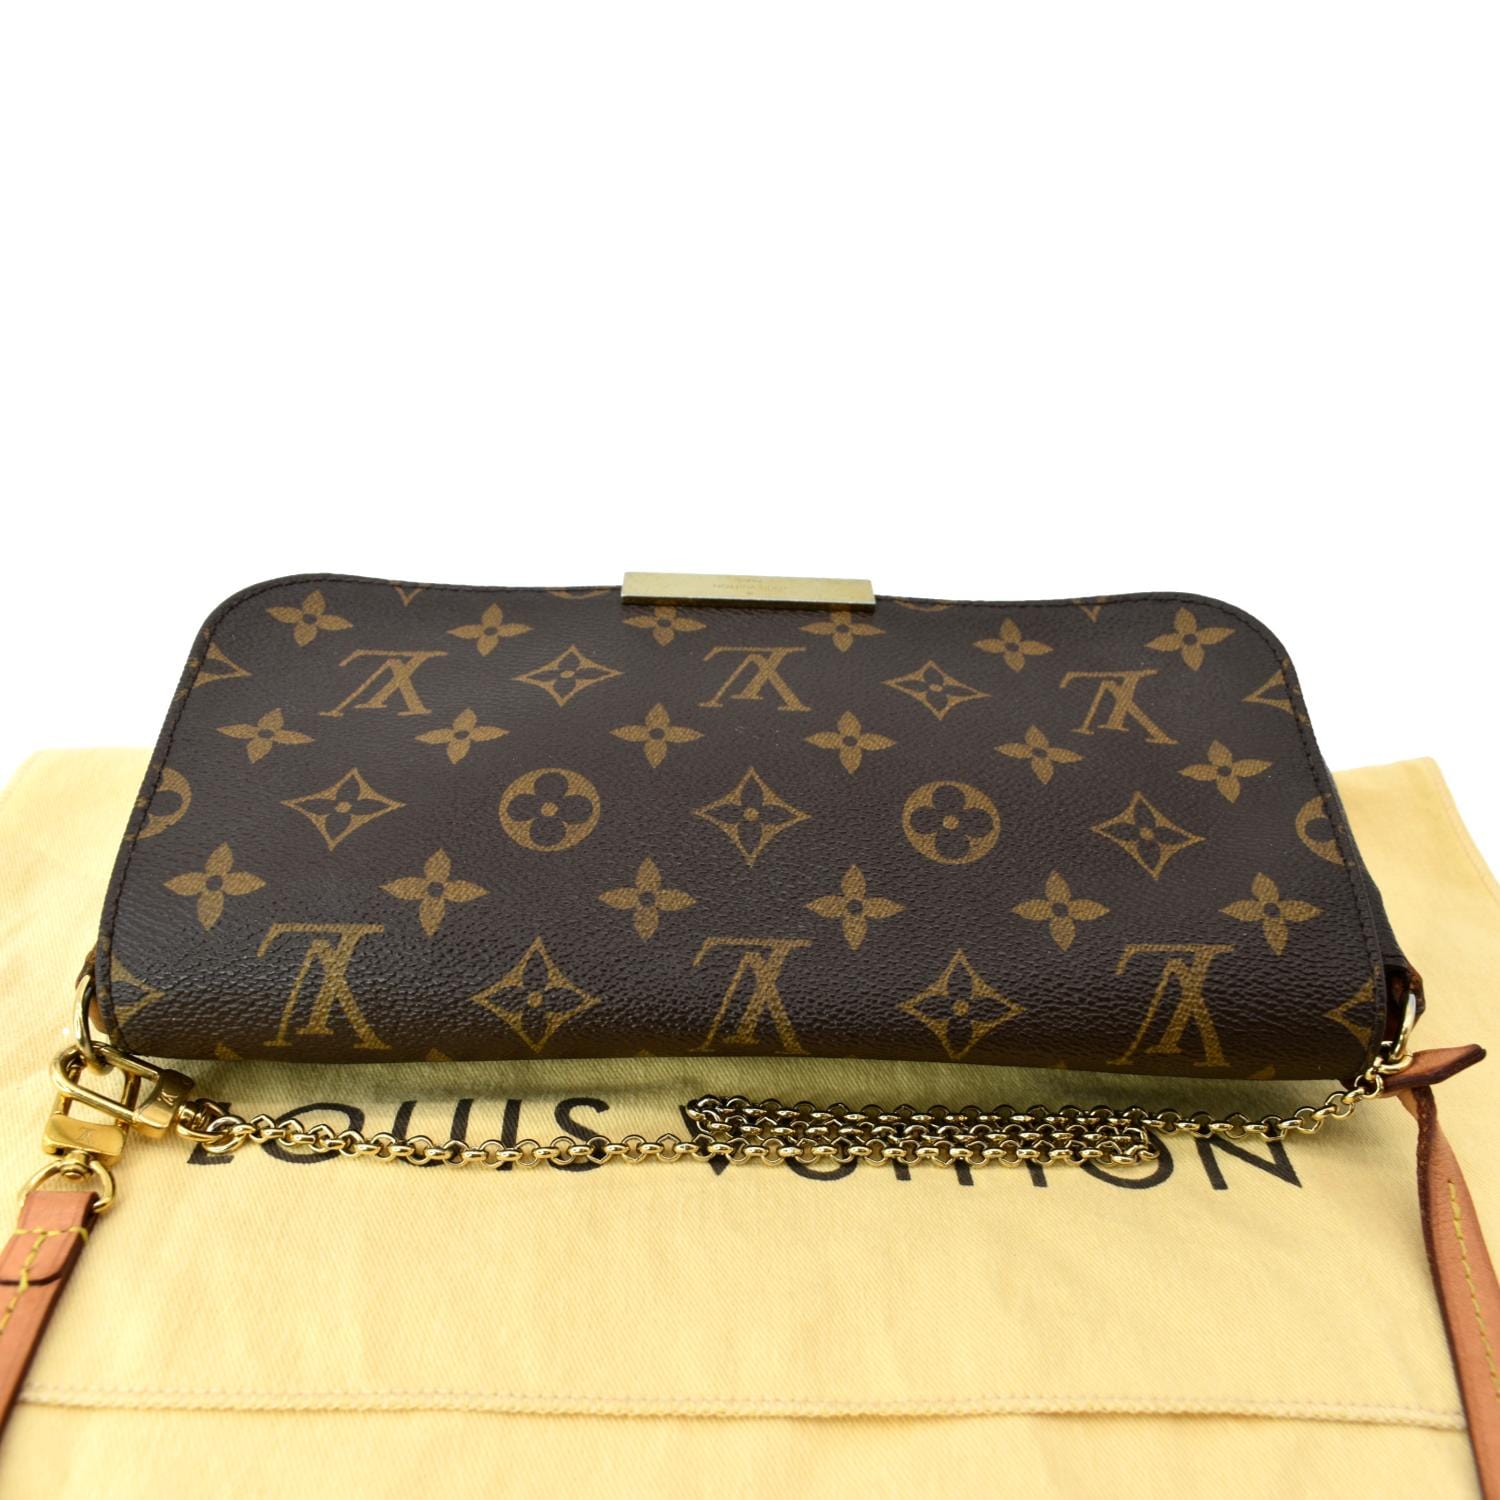 👜I want to know your thoughts on LV non-monogram bags? This is the Ca